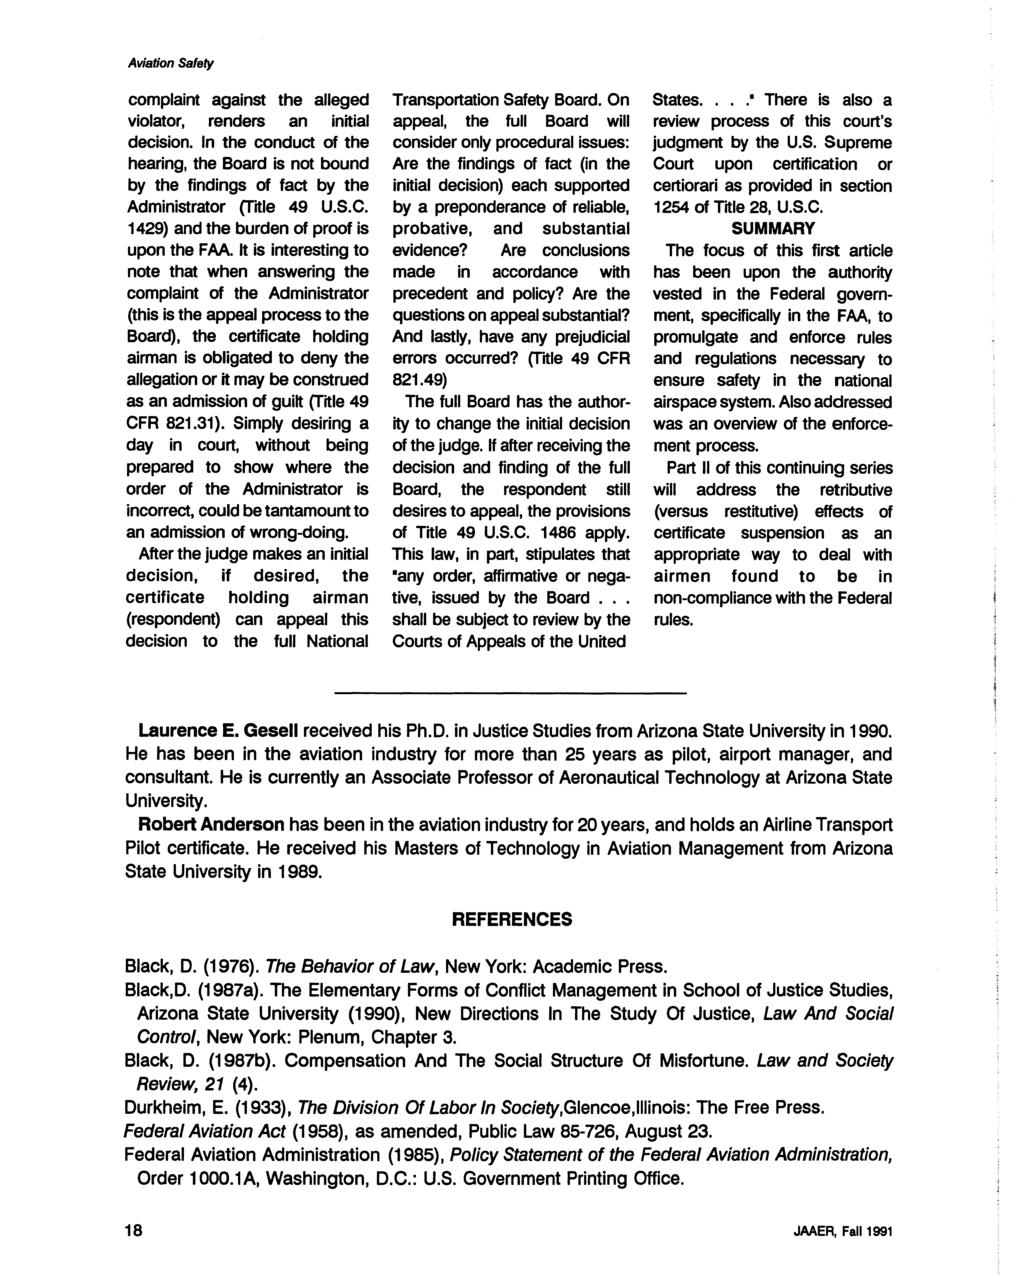 Aviation Safety Journal of Aviation/Aerospace Education & Research, Vol. 2, No. 1 [1991], Art. 6 complaint against the alleged violator, renders an initial decision.